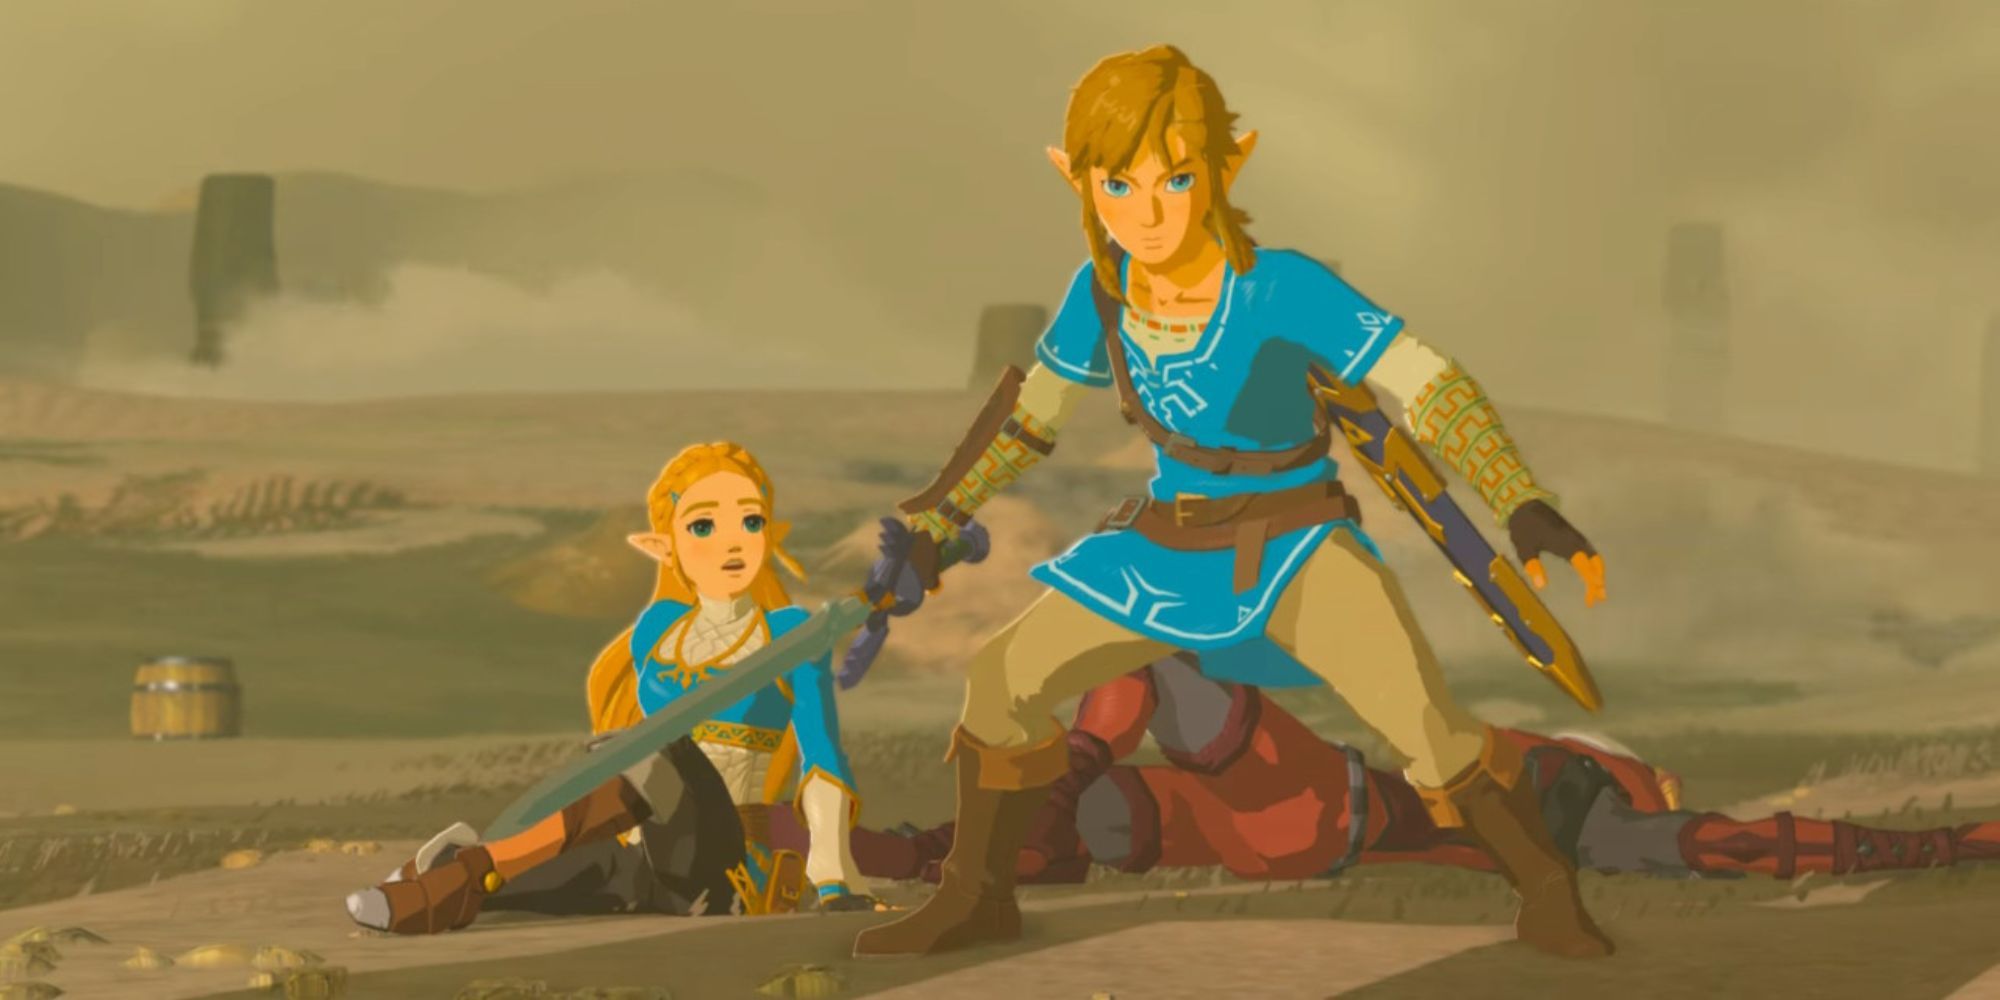 Link protects Zelda in Gerudo Desert after defeating a Yiga Clan Member